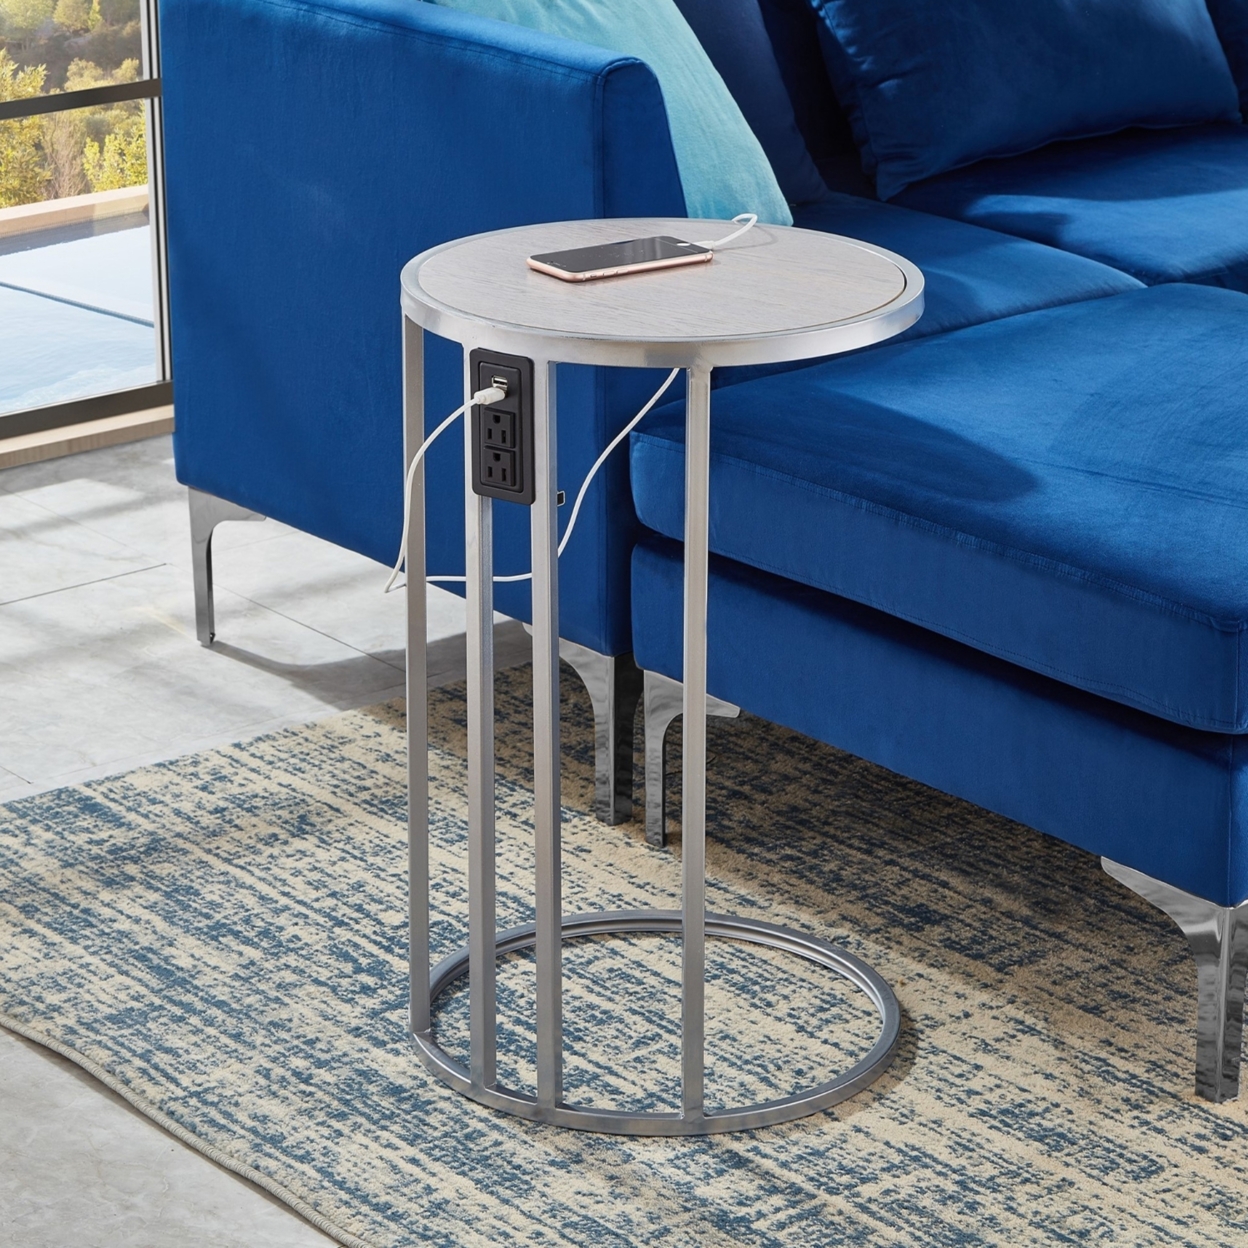 Galilea End Table - 2 USB Charging Ports 2 Outlets Power Plug - grey/chrome